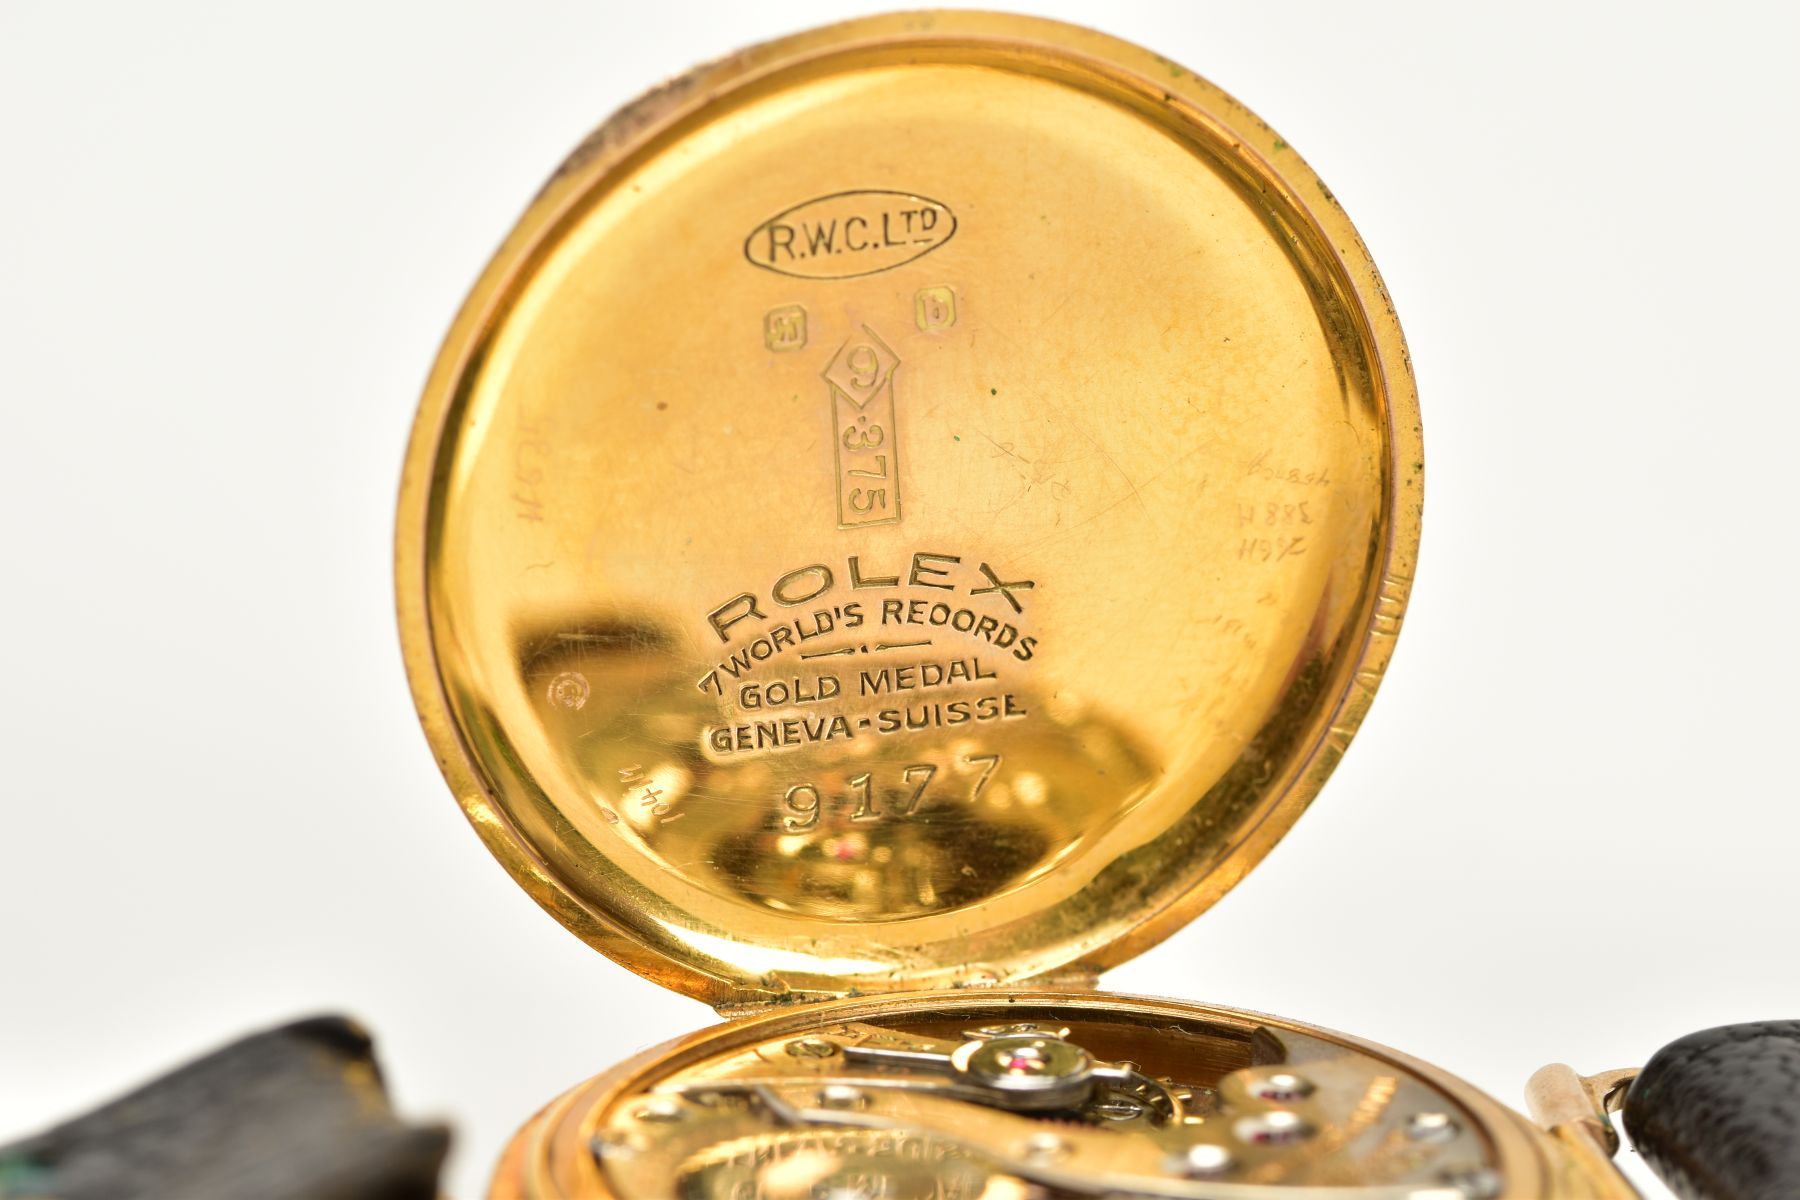 A 9CT GOLD ROLEX WRISTWATCH, silver engine turned design dial, Arabic numerals, within a gold case - Image 5 of 9